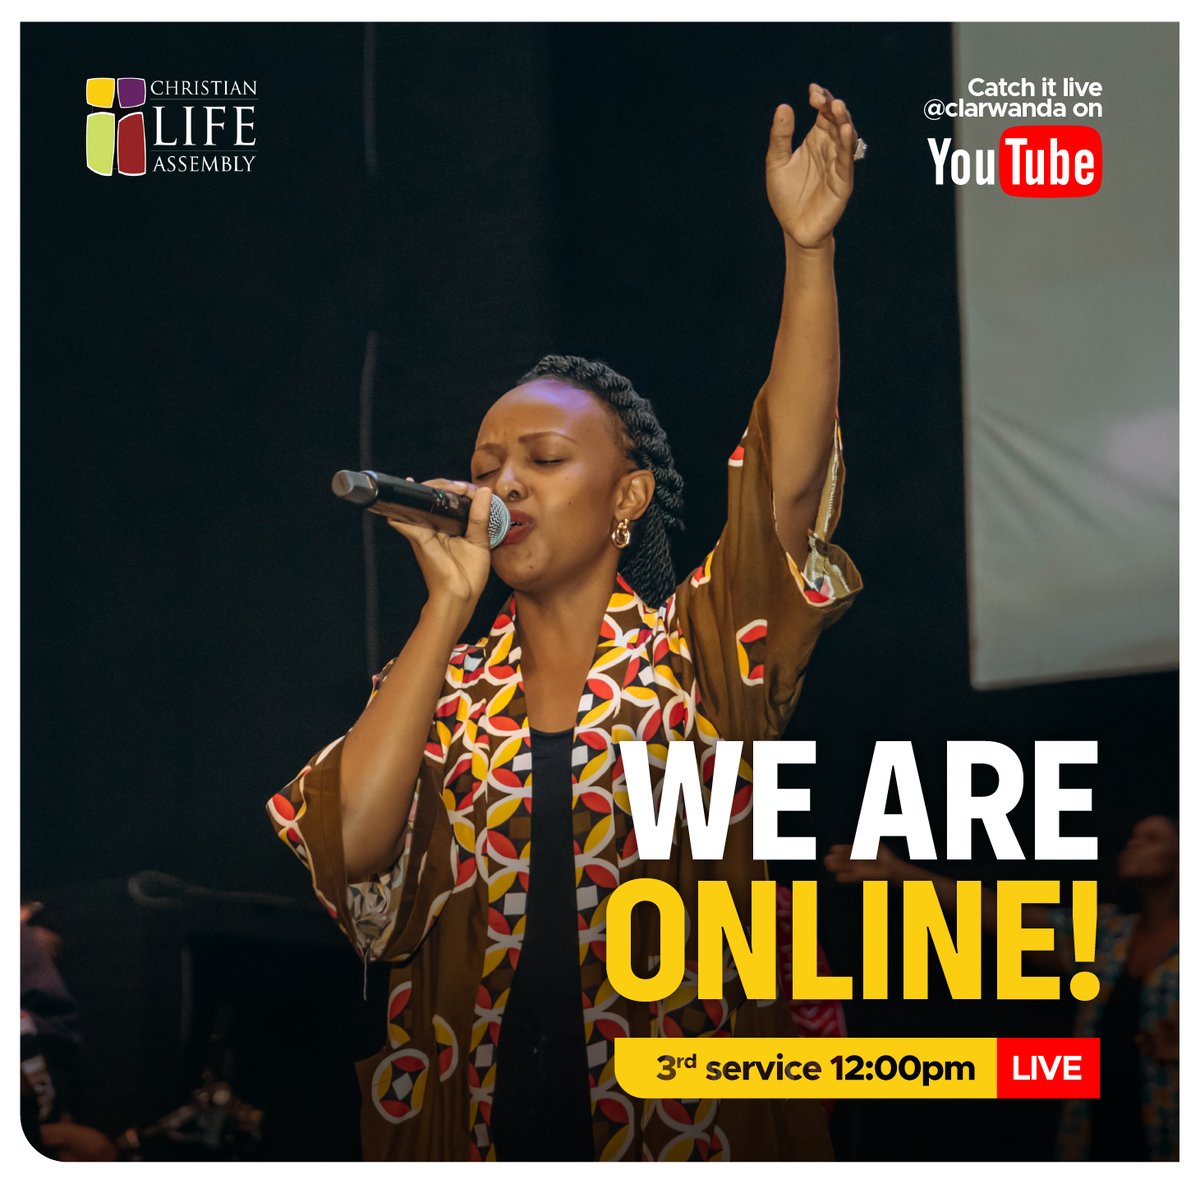 Join our online service now. Click on the link below to stream live. youtube.com/@clarwanda3039…